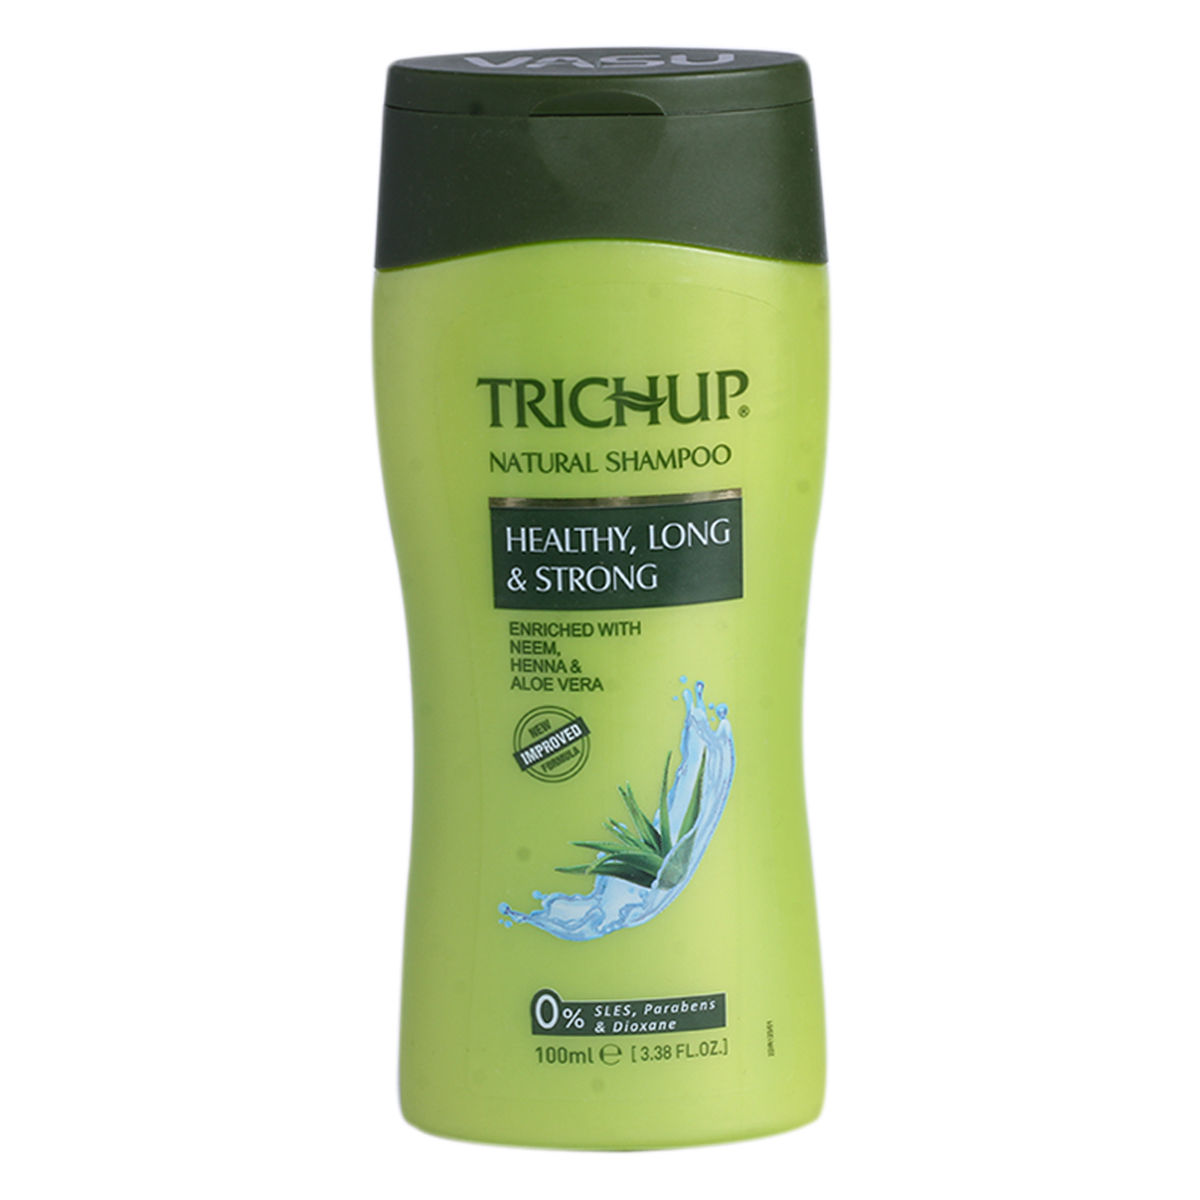 Buy Trichup Healthy Long & Strong Herbal Shampoo, 100 ml Online